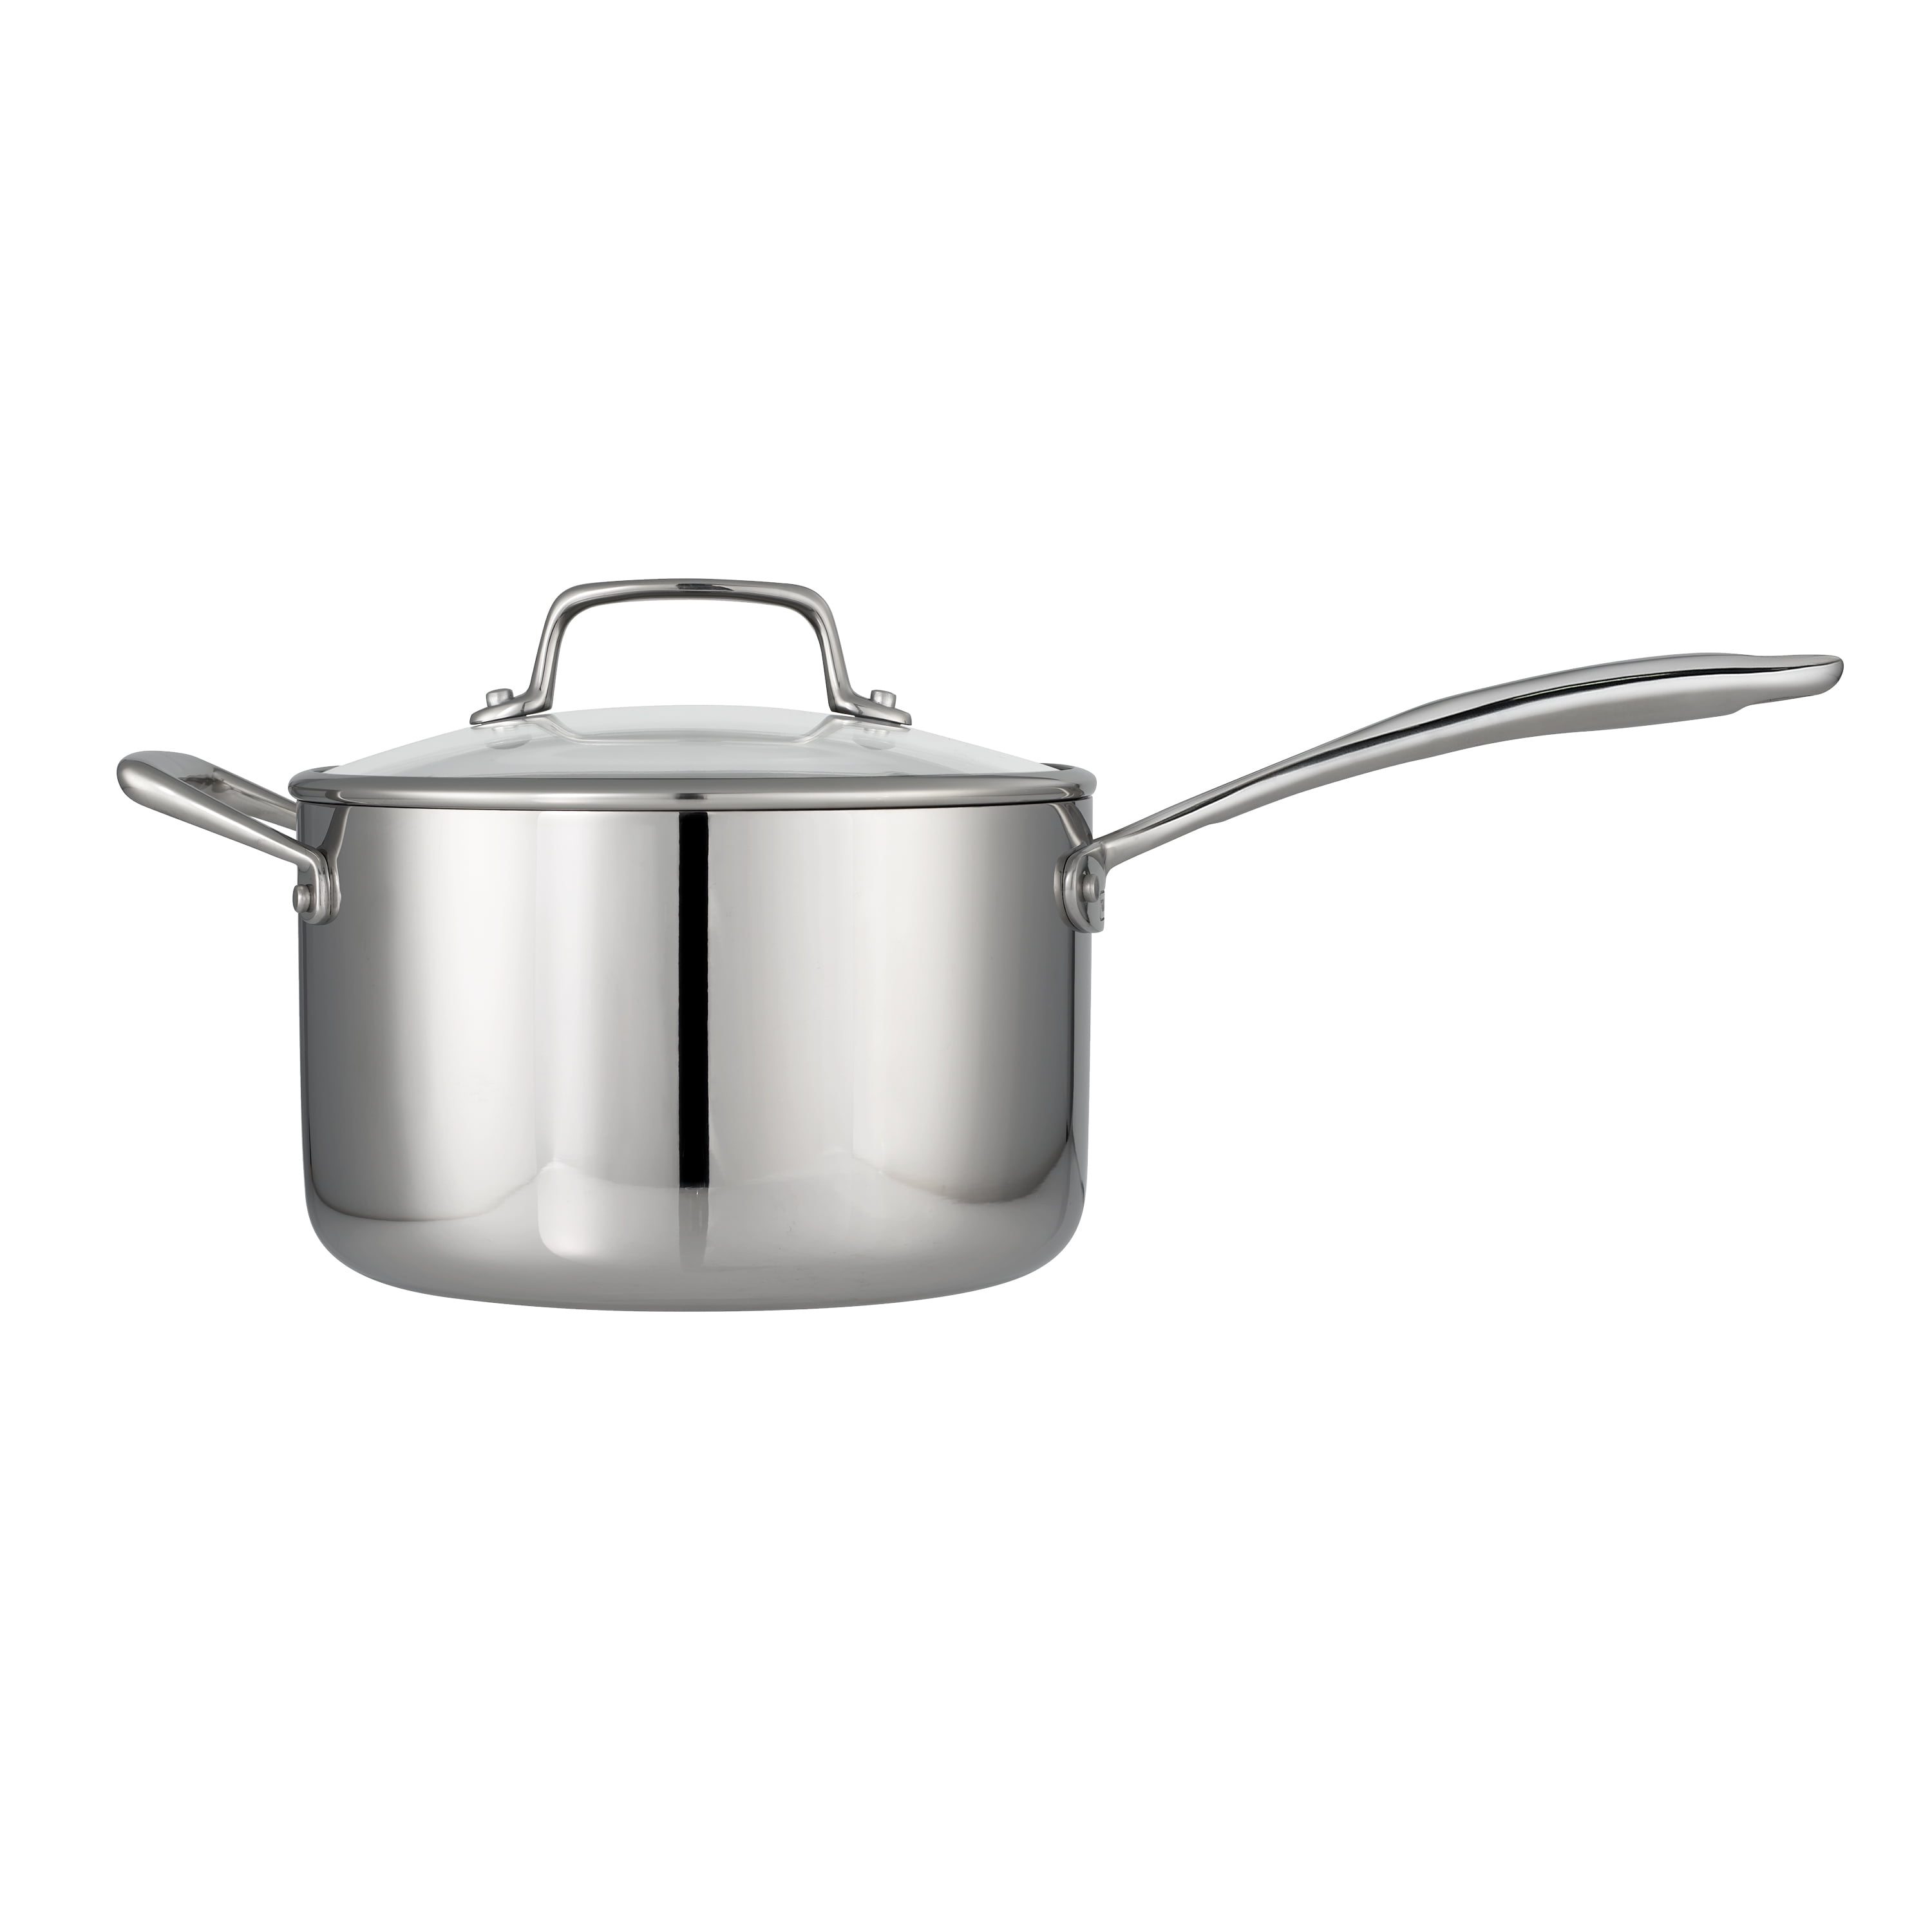 Tri-Ply Whole-Clad Stainless Steel Sauce Pan with Pour Spout,2.5 Quart  Small Mul